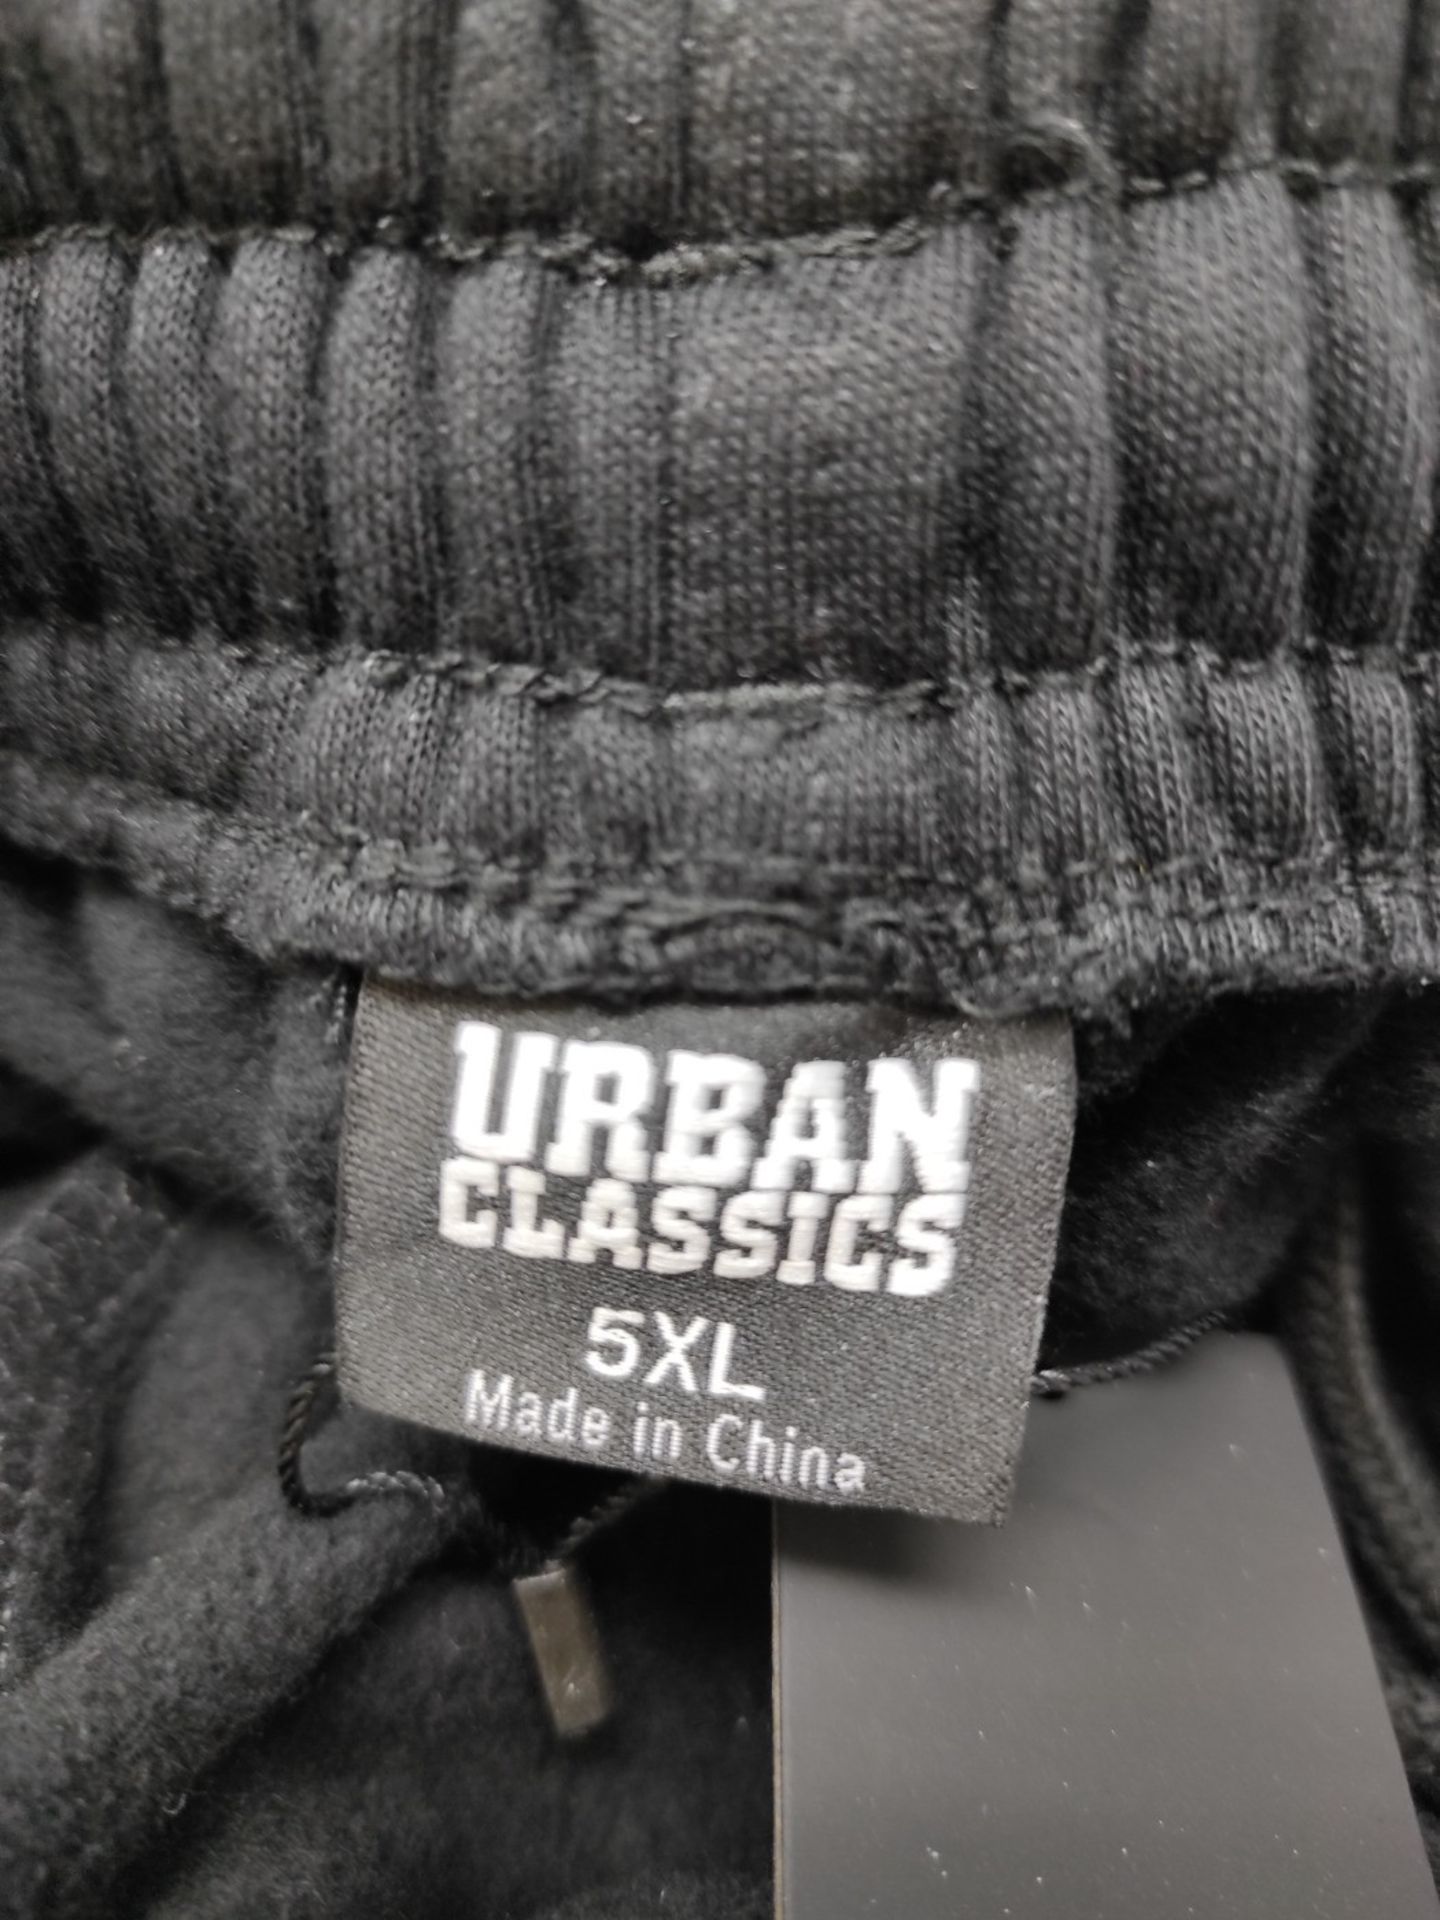 URBAN CLASSICS Sweatpants for Men in Warm and Heavy Cotton, Extreme Oversize Pants- Av - Image 3 of 3